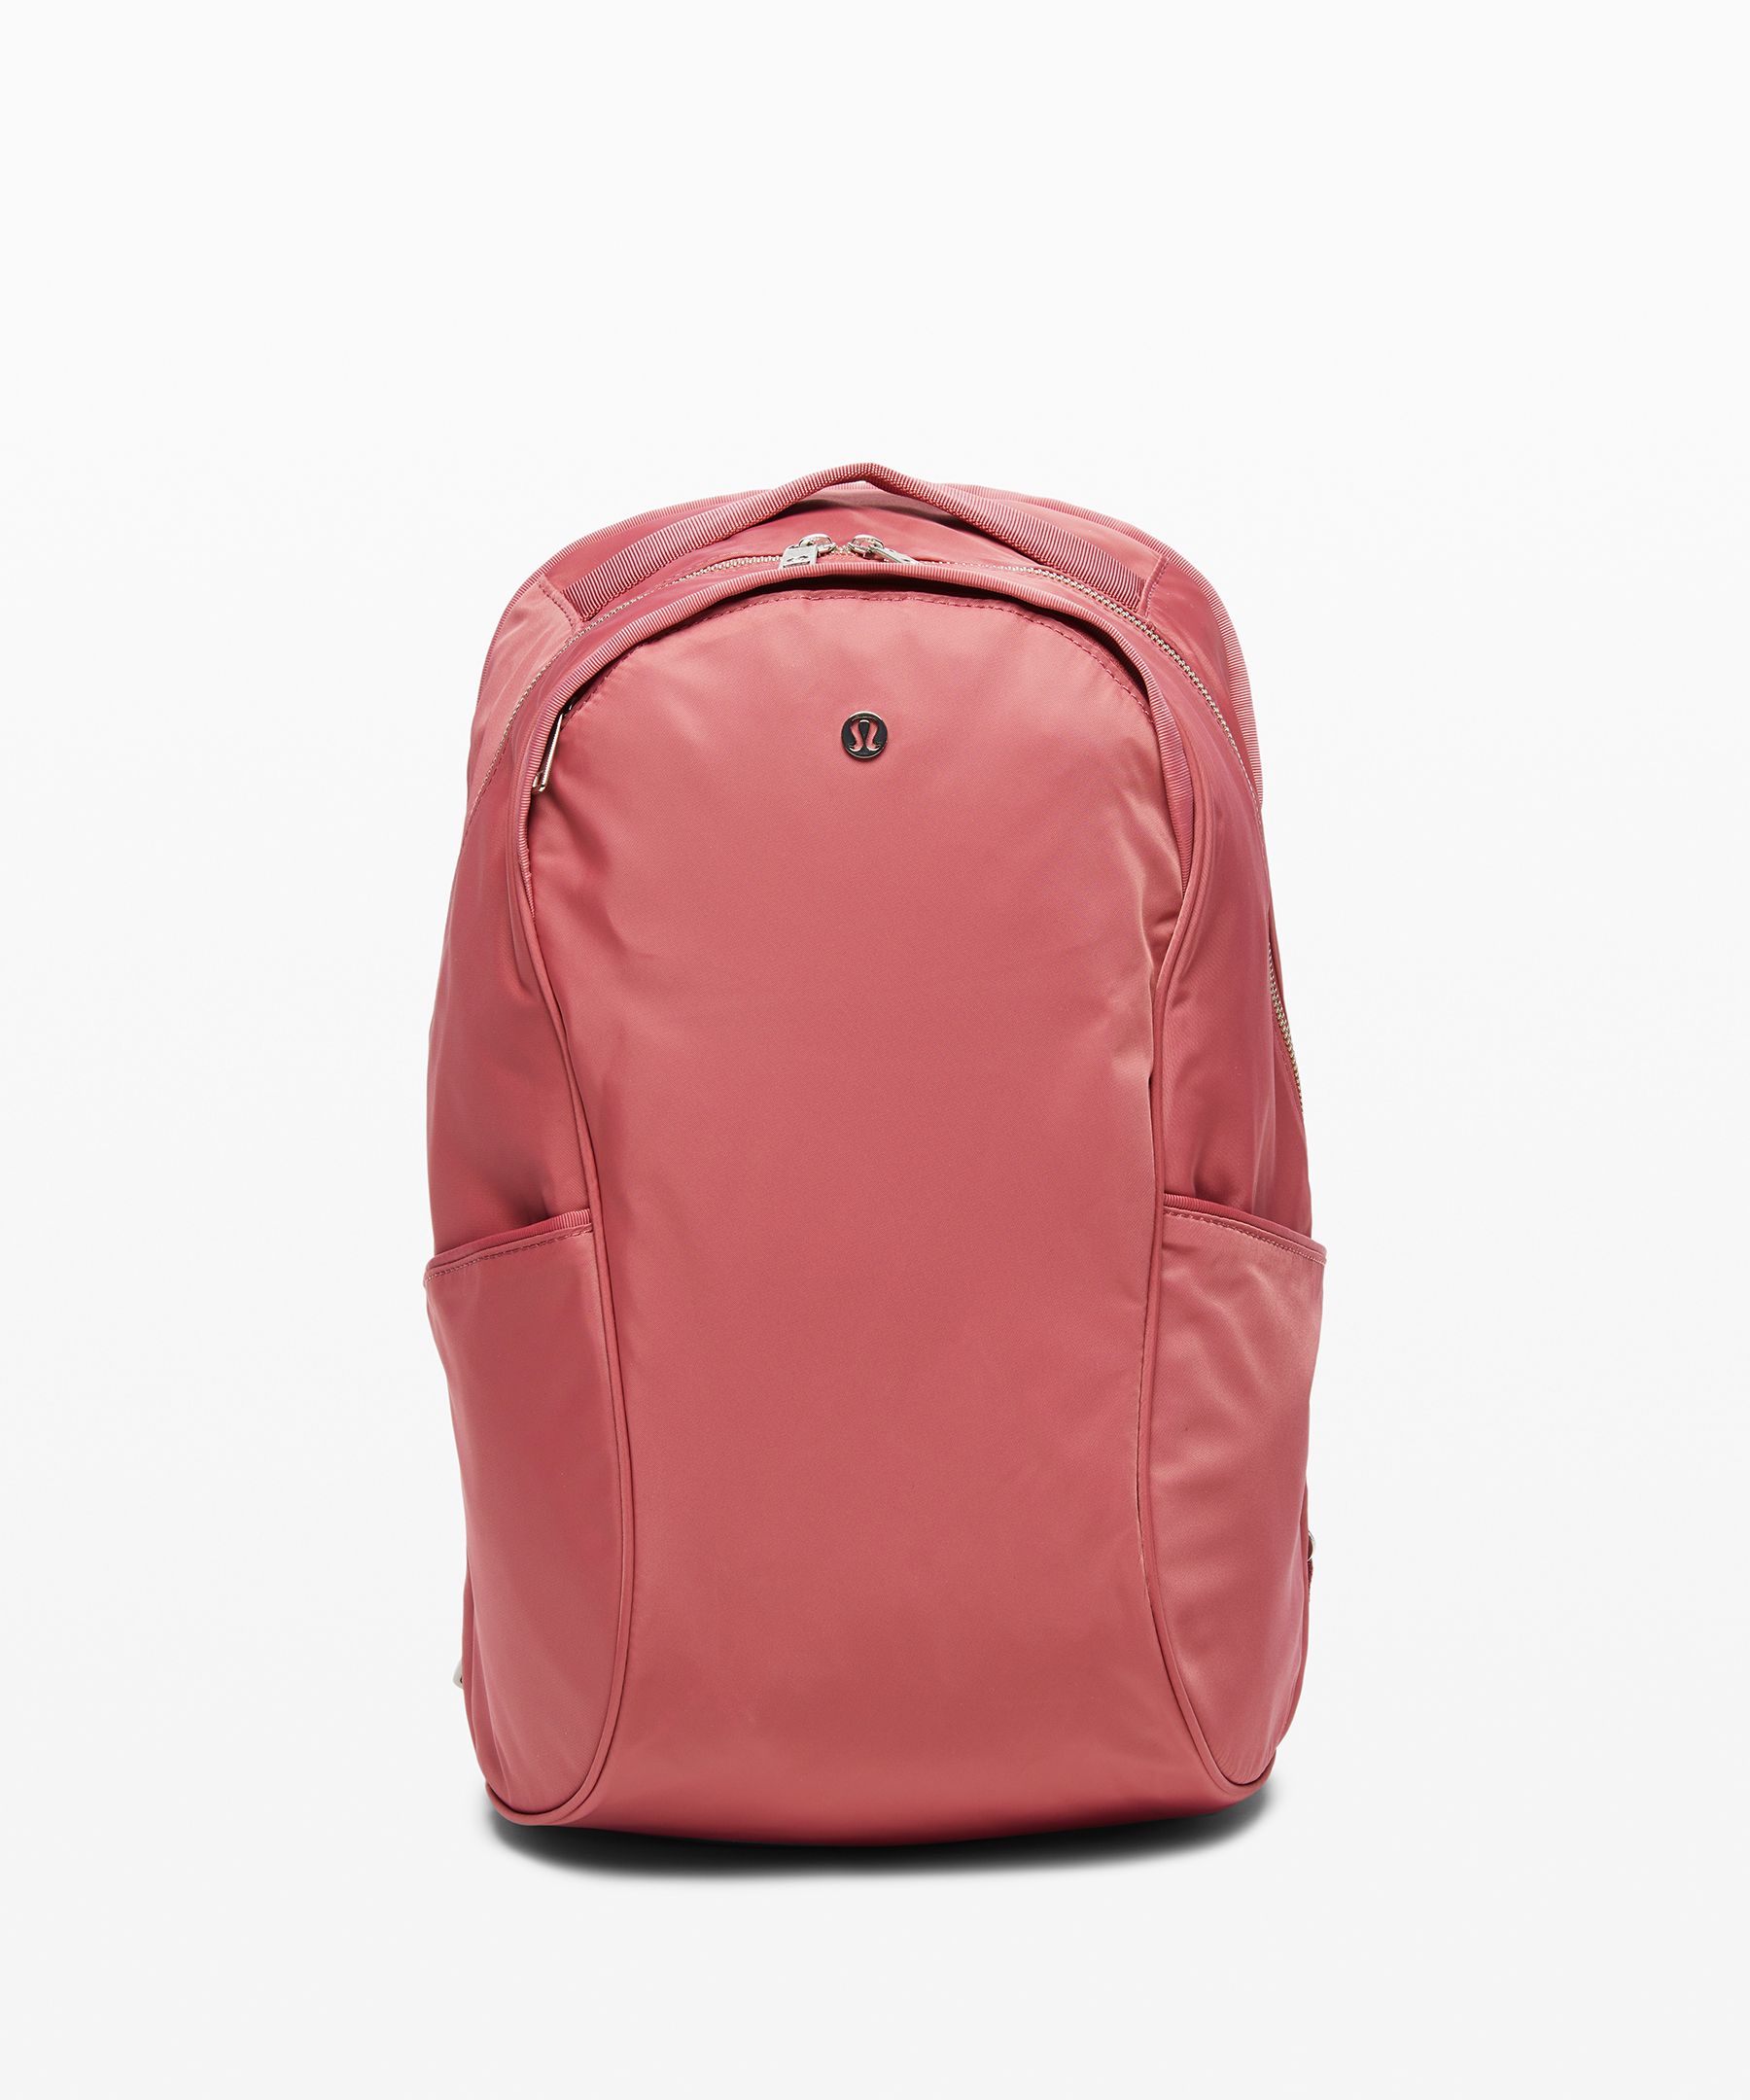 lululemon out of range backpack review